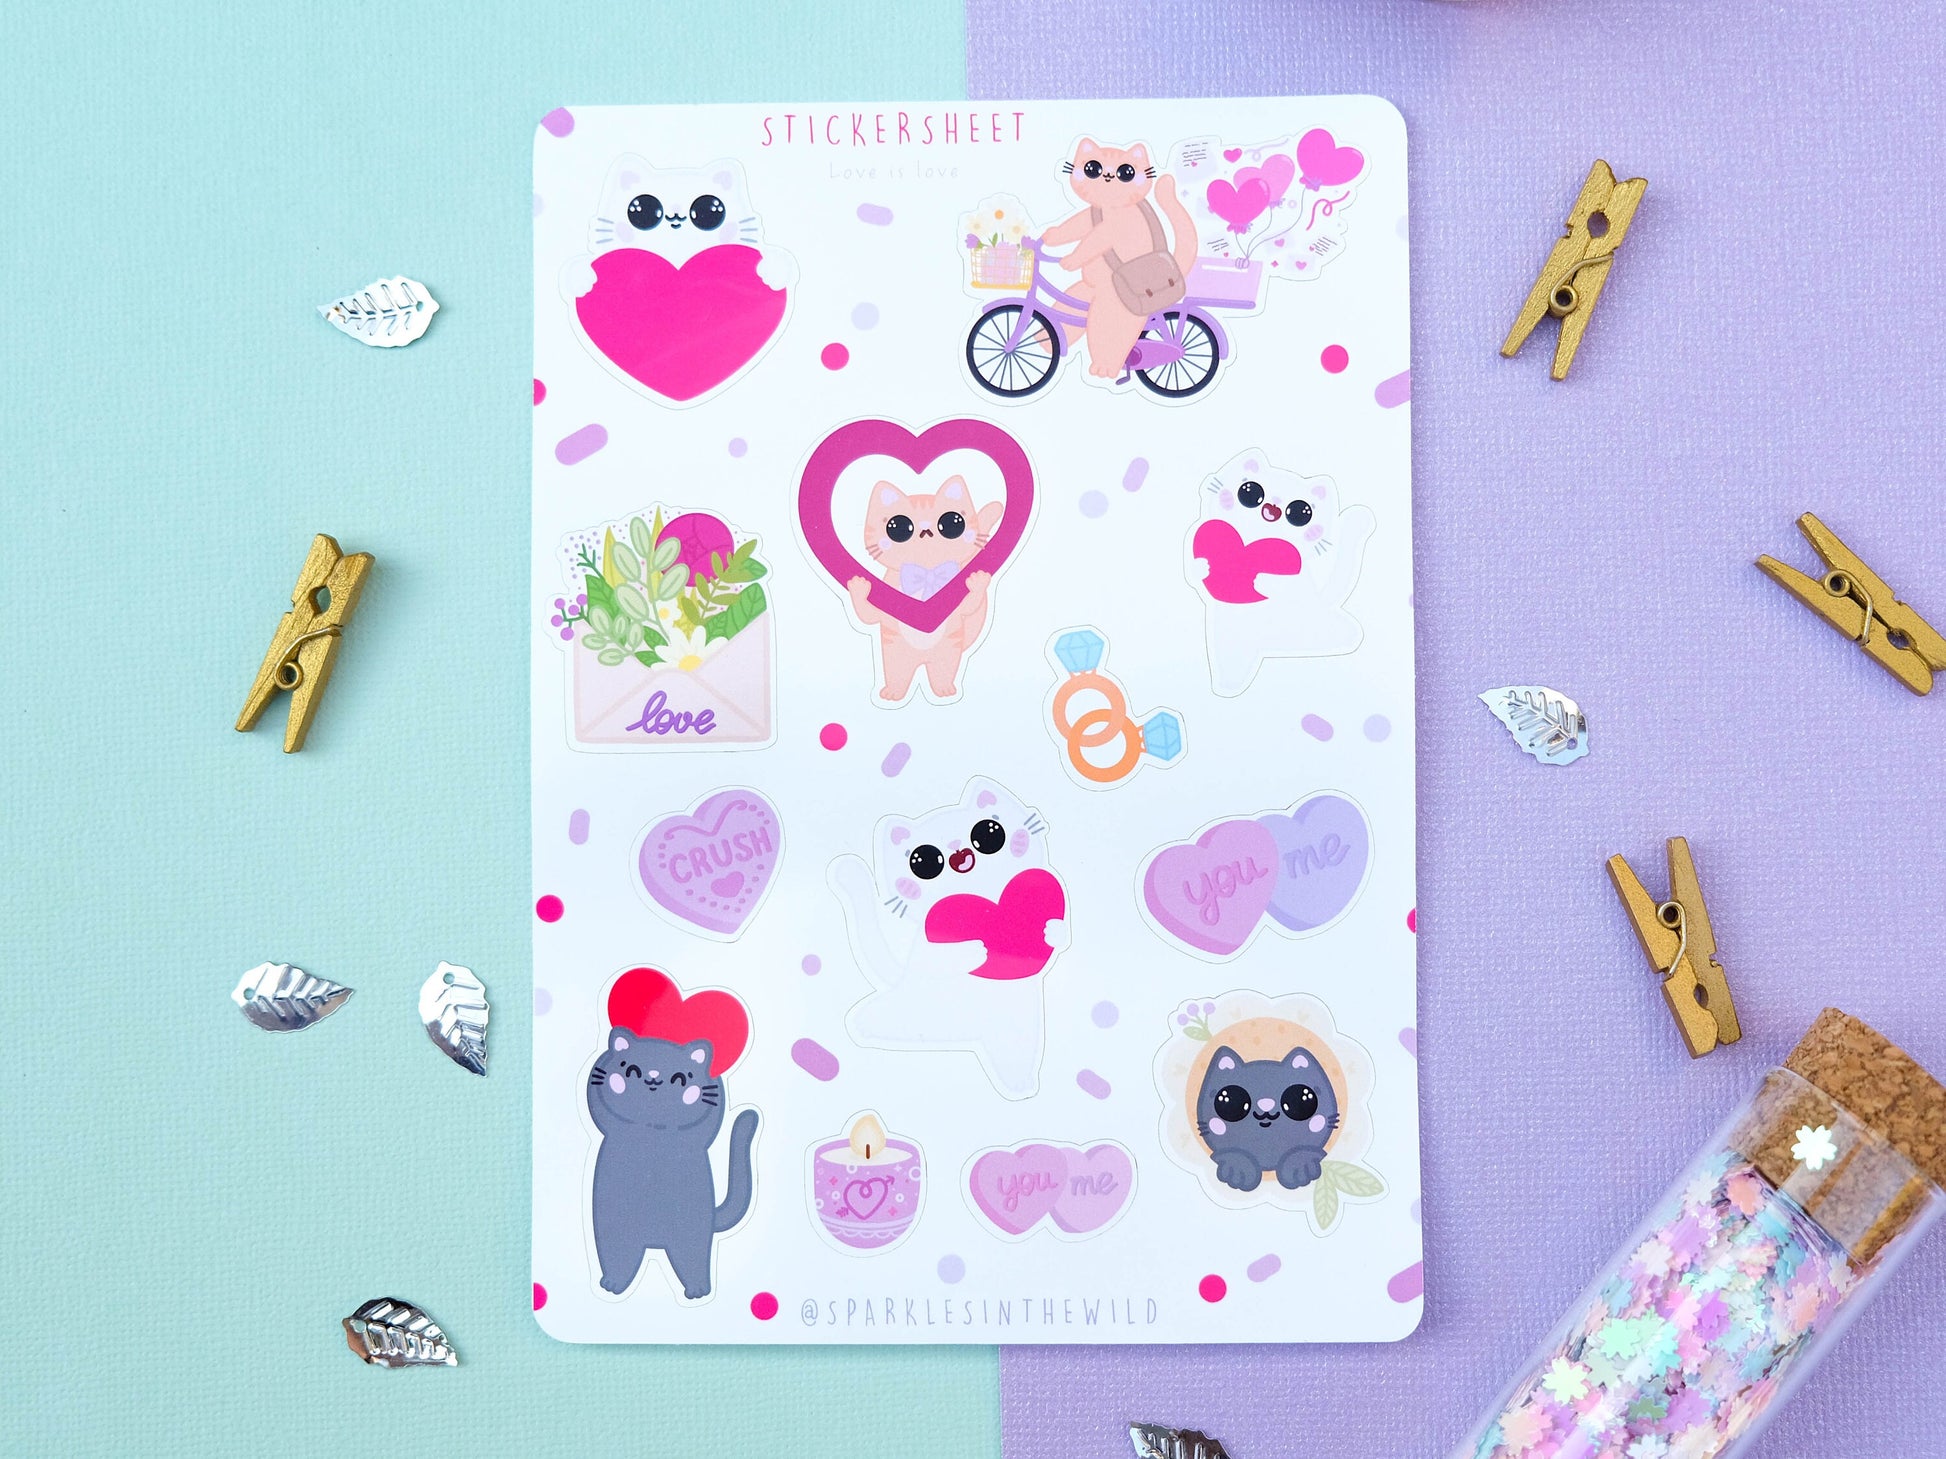 Sticker sheet water resistant Love and Hearts - Sticker Sheet Love is Loe with cats - Planner Stickers - Set of Sticker for Bullet Journal